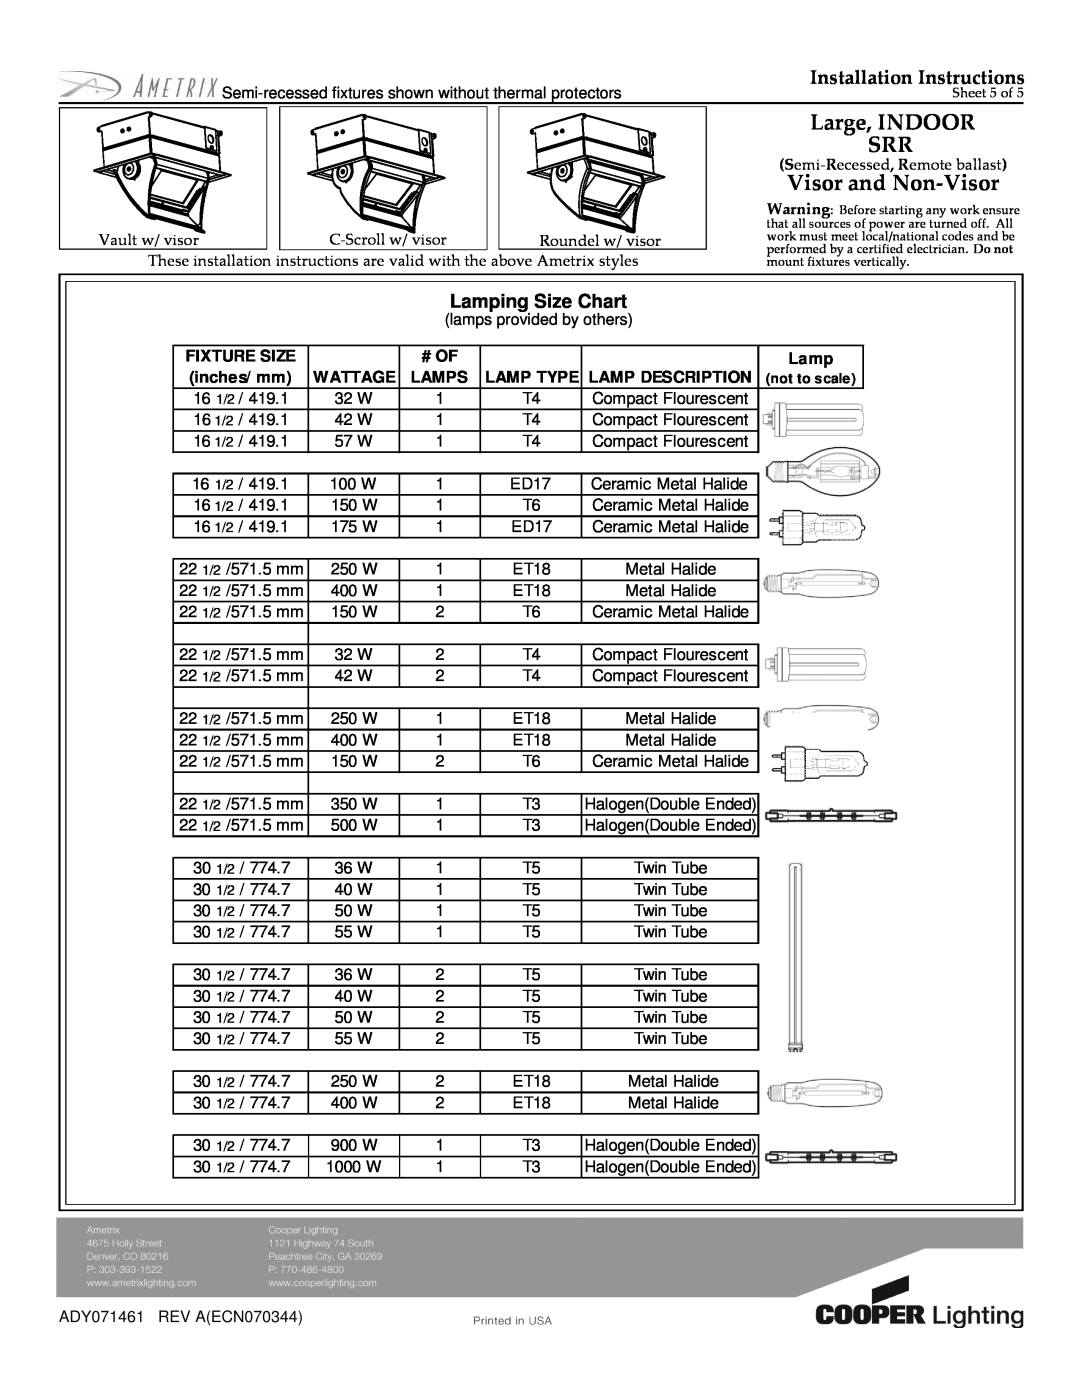 Cooper Lighting ADY071461 Fixture Size, # Of, inches/ mm, Wattage, Lamps, Lamp Type, Lamp Description 